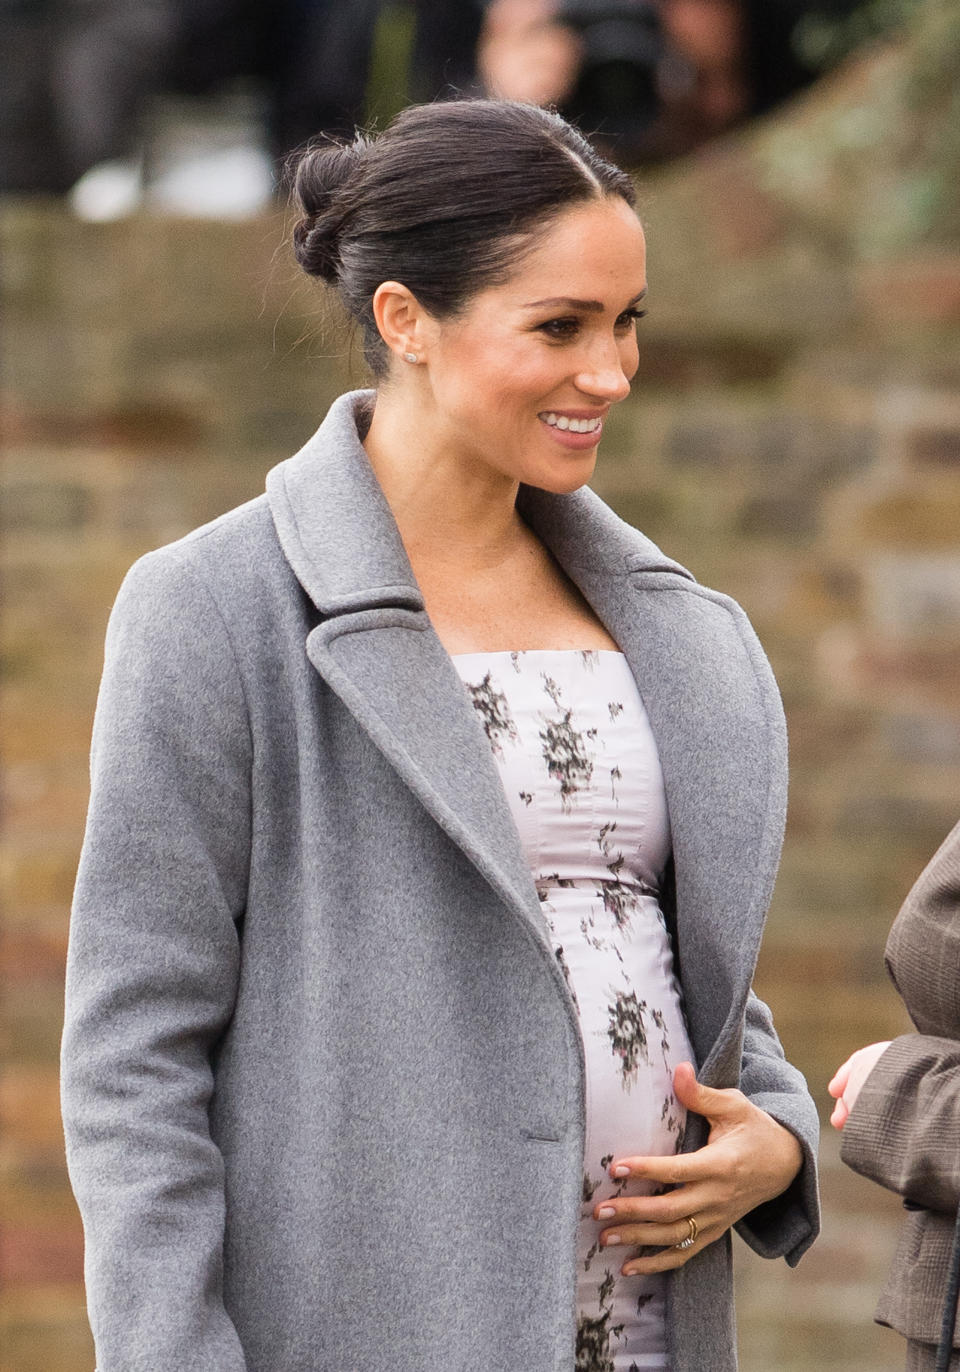 Meghan pats her baby bump [Photo: Getty]